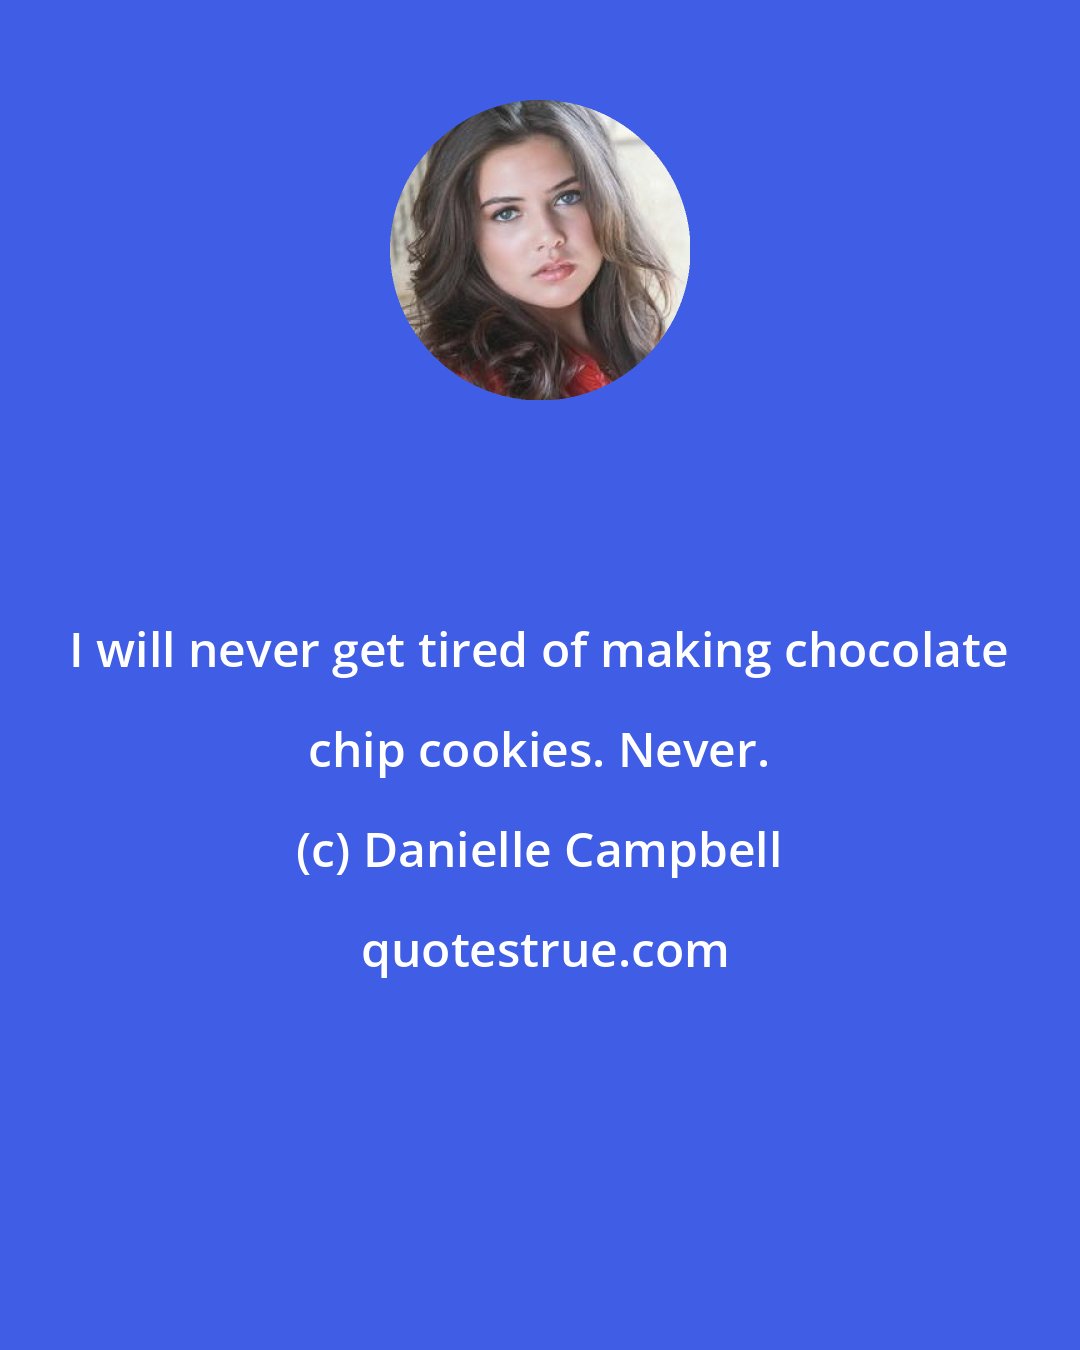 Danielle Campbell: I will never get tired of making chocolate chip cookies. Never.